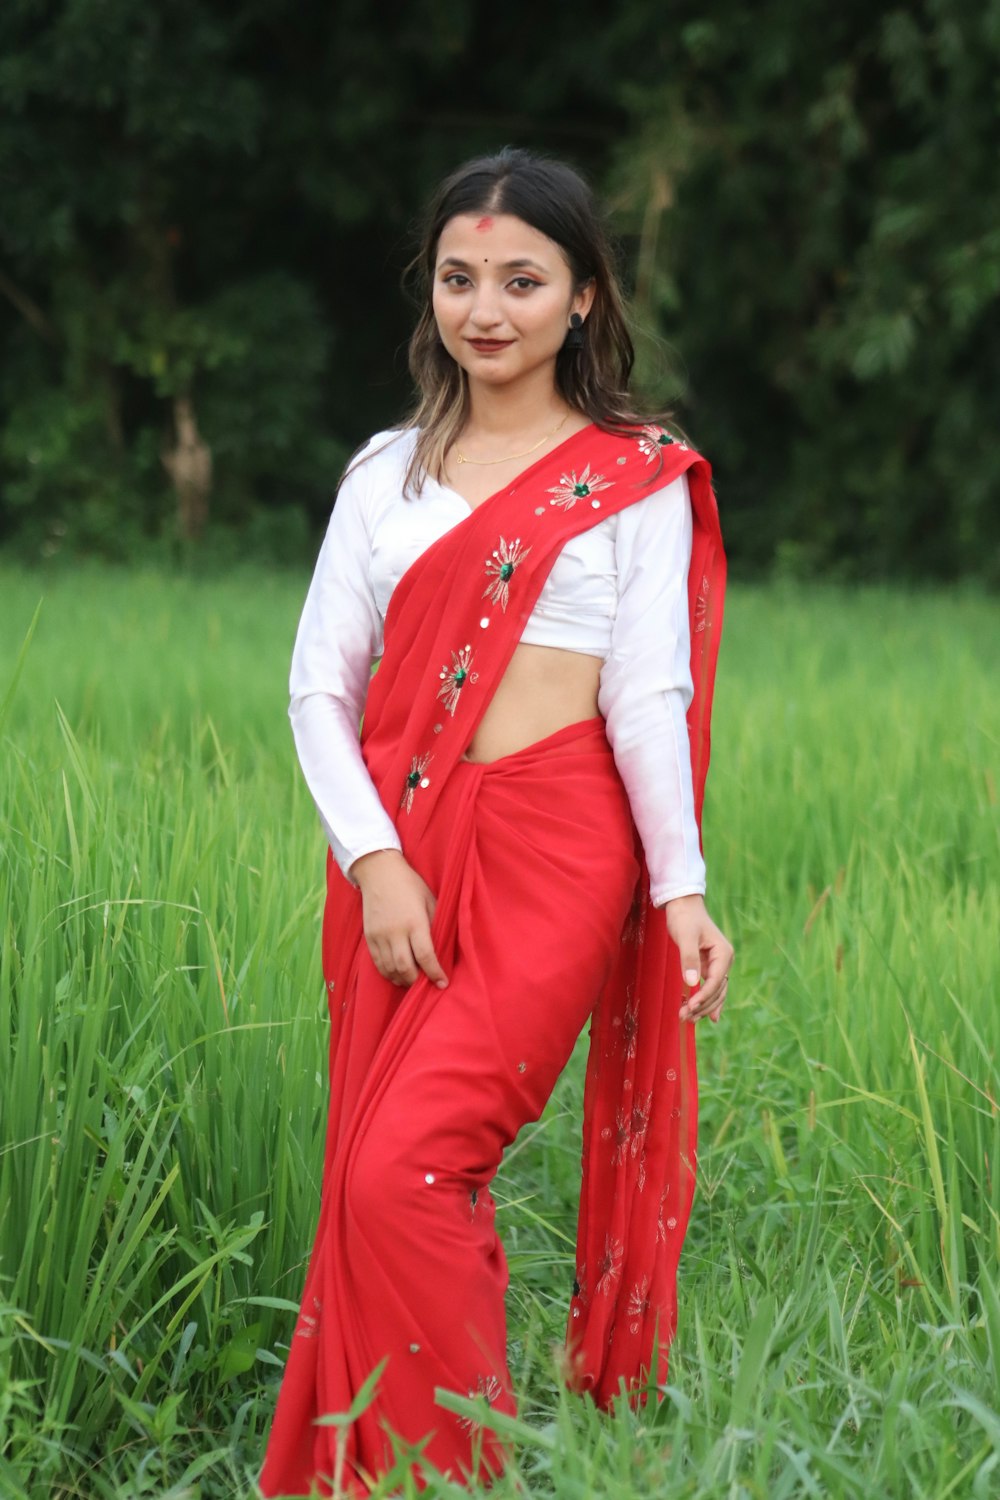 a woman in a red sari standing in tall grass